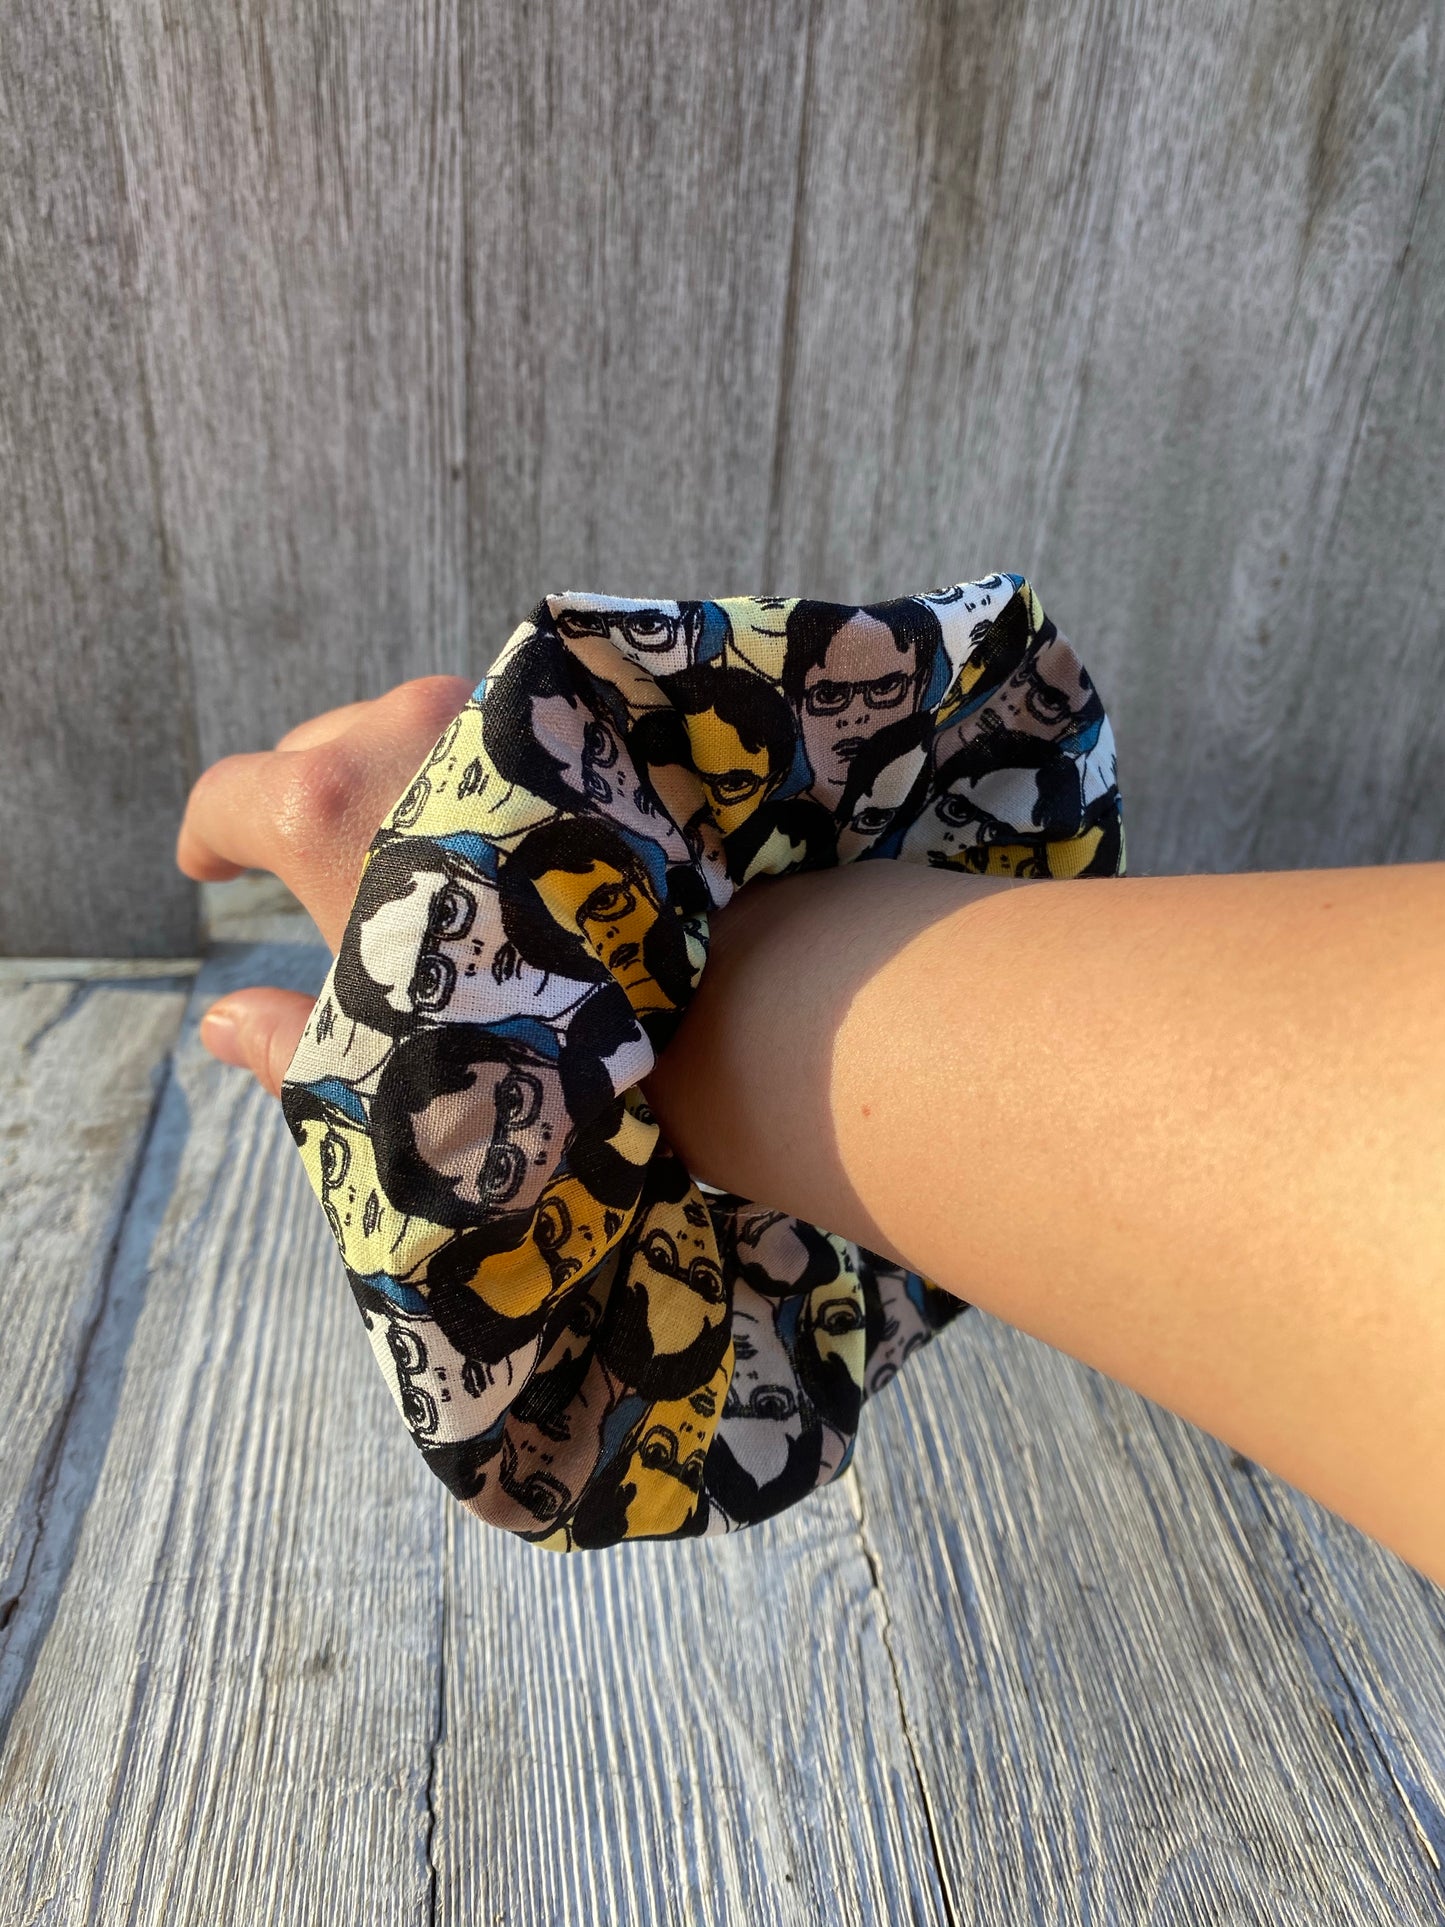 Dwight Schrute The Office Scrunchie Hair Tie Gift 